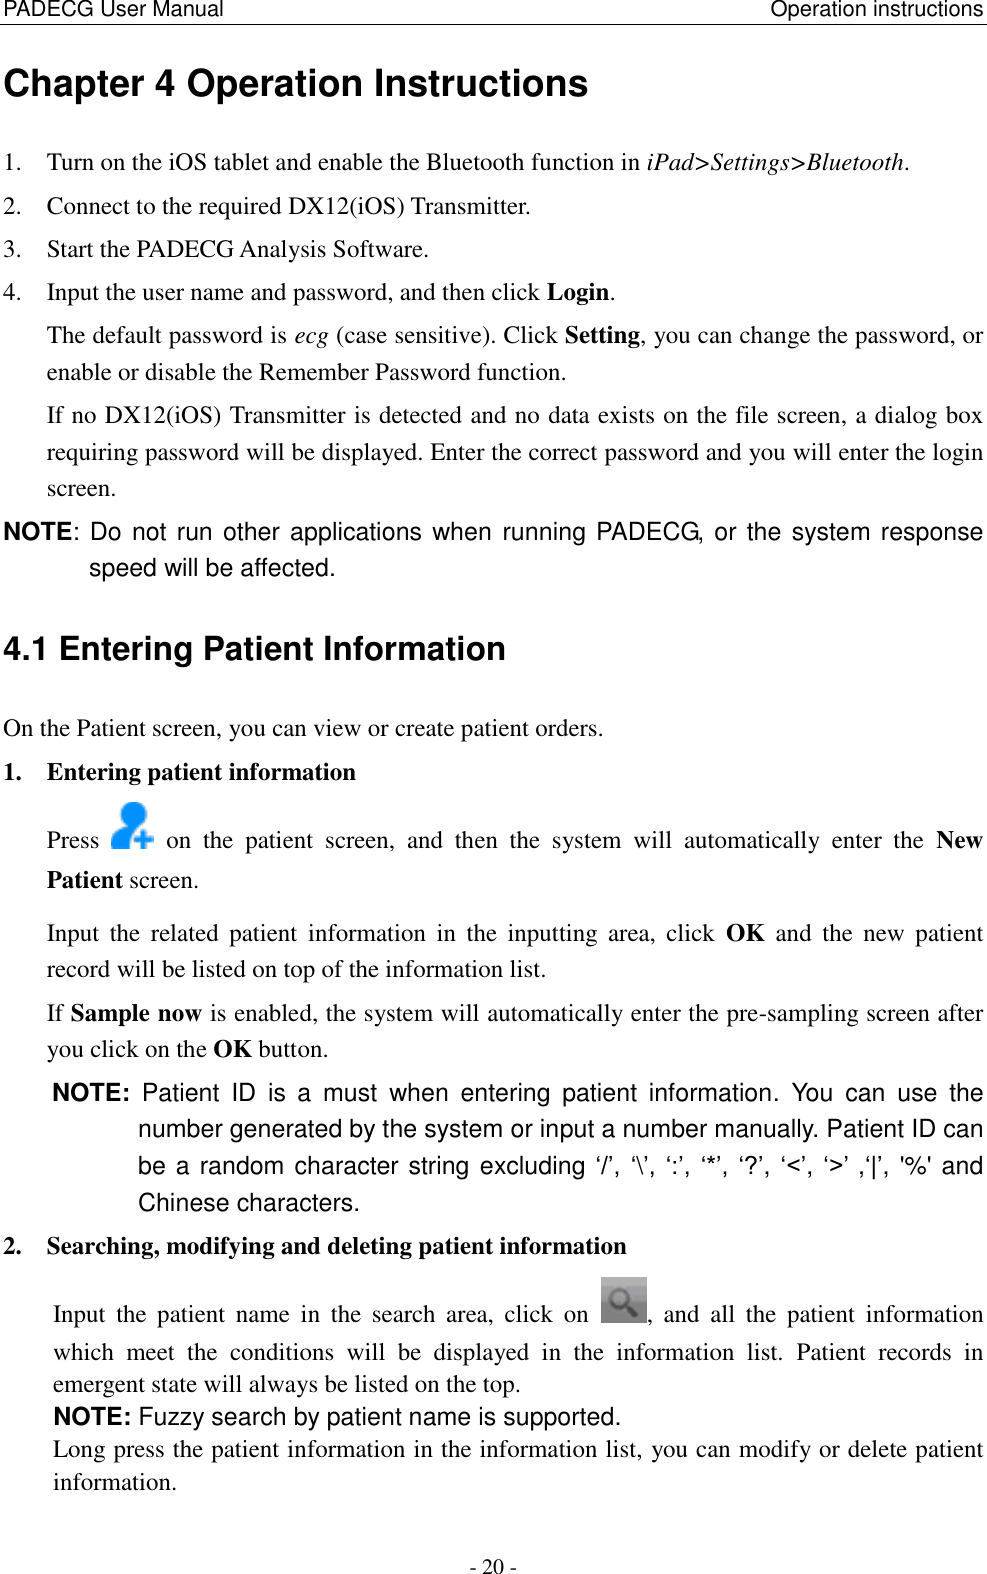 PADECG User Manual                                                  Operation instructions - 20 - Chapter 4 Operation Instructions 1. Turn on the iOS tablet and enable the Bluetooth function in iPad&gt;Settings&gt;Bluetooth. 2. Connect to the required DX12(iOS) Transmitter. 3. Start the PADECG Analysis Software. 4. Input the user name and password, and then click Login. The default password is ecg (case sensitive). Click Setting, you can change the password, or enable or disable the Remember Password function. If no DX12(iOS) Transmitter is detected and no data exists on the file screen, a dialog box requiring password will be displayed. Enter the correct password and you will enter the login screen.   NOTE: Do not run other applications when running PADECG, or the system response speed will be affected. 4.1 Entering Patient Information   On the Patient screen, you can view or create patient orders. 1. Entering patient information Press    on  the  patient  screen,  and  then  the  system  will  automatically  enter  the  New Patient screen. Input  the  related  patient  information  in  the  inputting  area,  click  OK and  the  new  patient record will be listed on top of the information list. If Sample now is enabled, the system will automatically enter the pre-sampling screen after you click on the OK button. NOTE:  Patient  ID  is  a  must  when  entering  patient  information.  You  can  use  the number generated by the system or input a number manually. Patient ID can be a random character string excluding ‘/’,  ‘\’,  ‘:’,  ‘*’, ‘?’, ‘&lt;’, ‘&gt;’  ,‘|’, &apos;%&apos; and Chinese characters. 2. Searching, modifying and deleting patient information Input  the  patient  name  in  the  search  area,  click  on  ,  and  all  the  patient  information which  meet  the  conditions  will  be  displayed  in  the  information  list.  Patient  records  in emergent state will always be listed on the top. NOTE: Fuzzy search by patient name is supported. Long press the patient information in the information list, you can modify or delete patient information. 